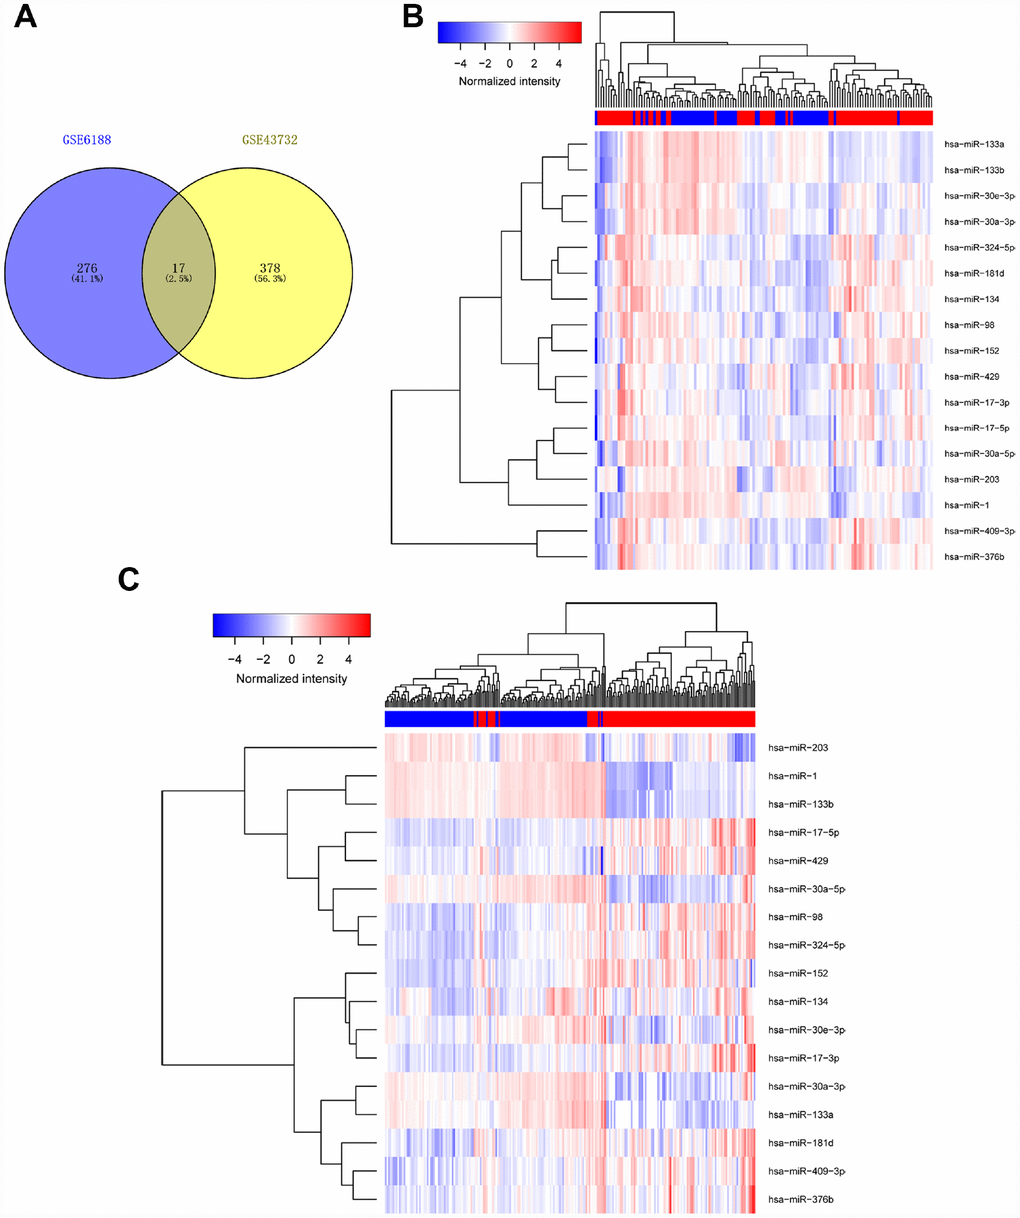 Determination of differentially expressed miRNAs. We analyzed data of two non-coding RNA profiling arrays (ID: GSE43732, GSE6188). Differentially expressed miRNAs with large changes (p1.5) in both arrays were considered to be significantly altered. Results are shown in Venn diagram (A) and heat map (B).